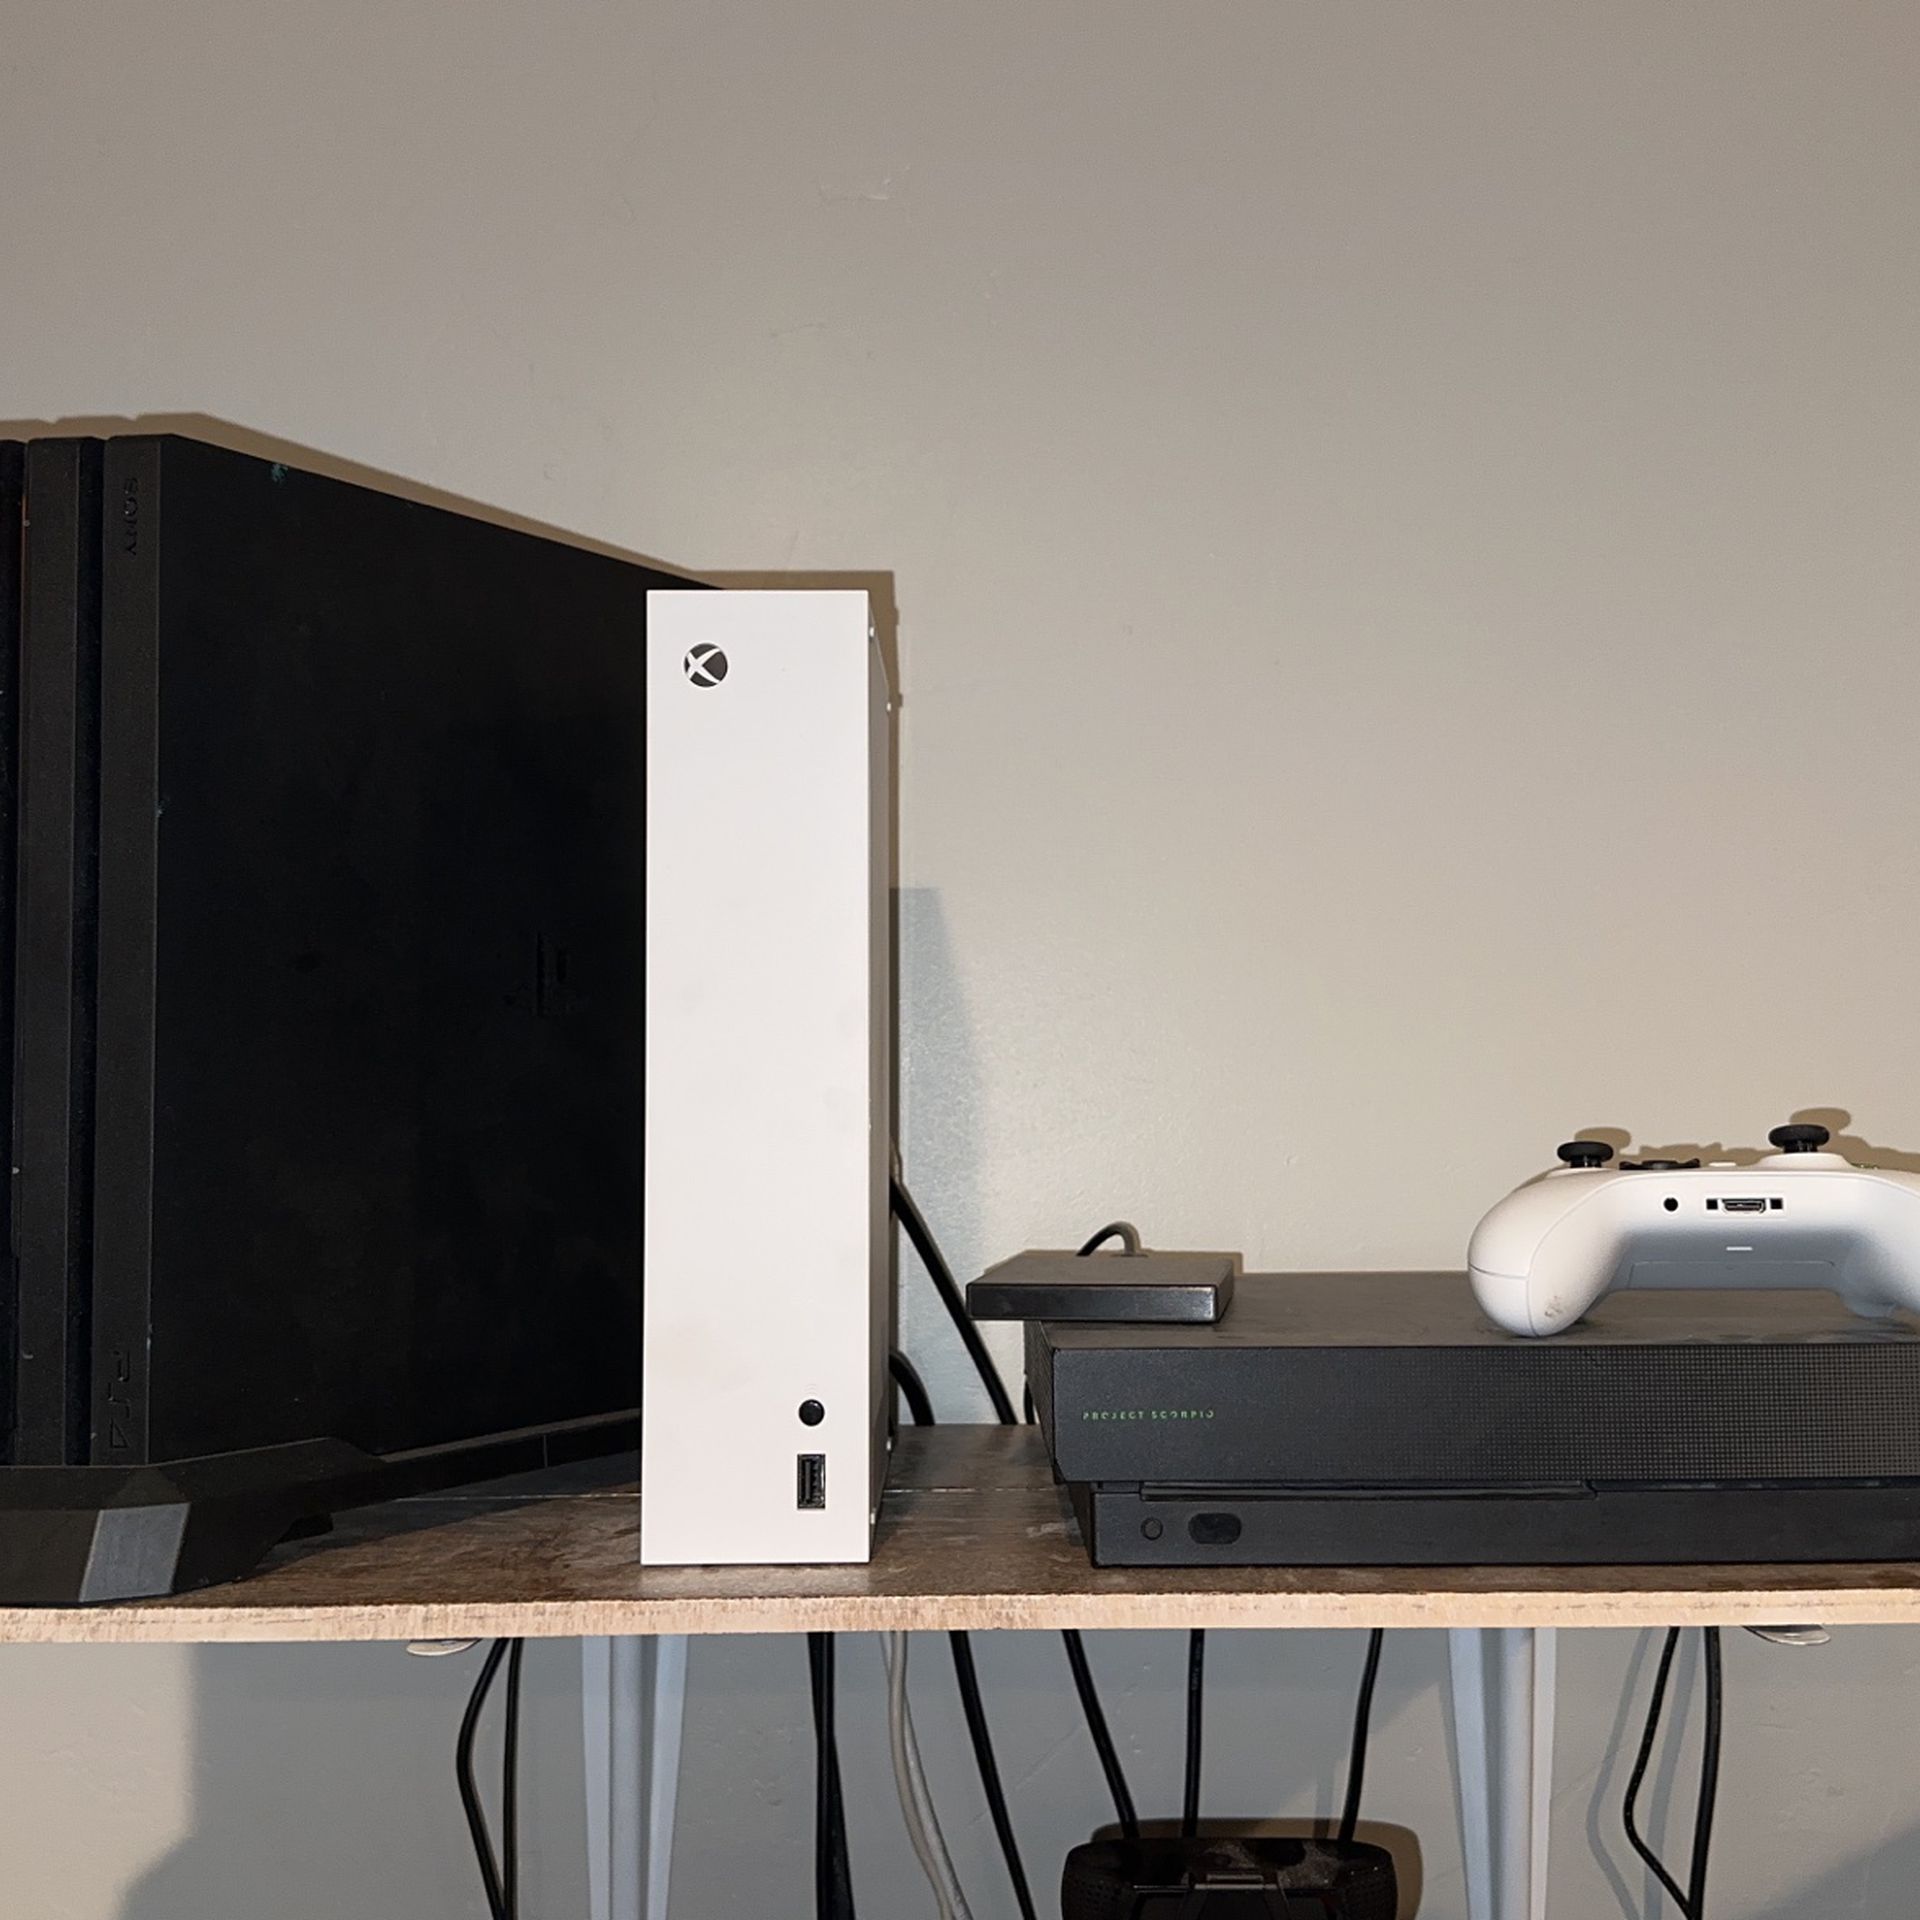 PS4 Pro, Xbox Series S, And Project Scorpio One X